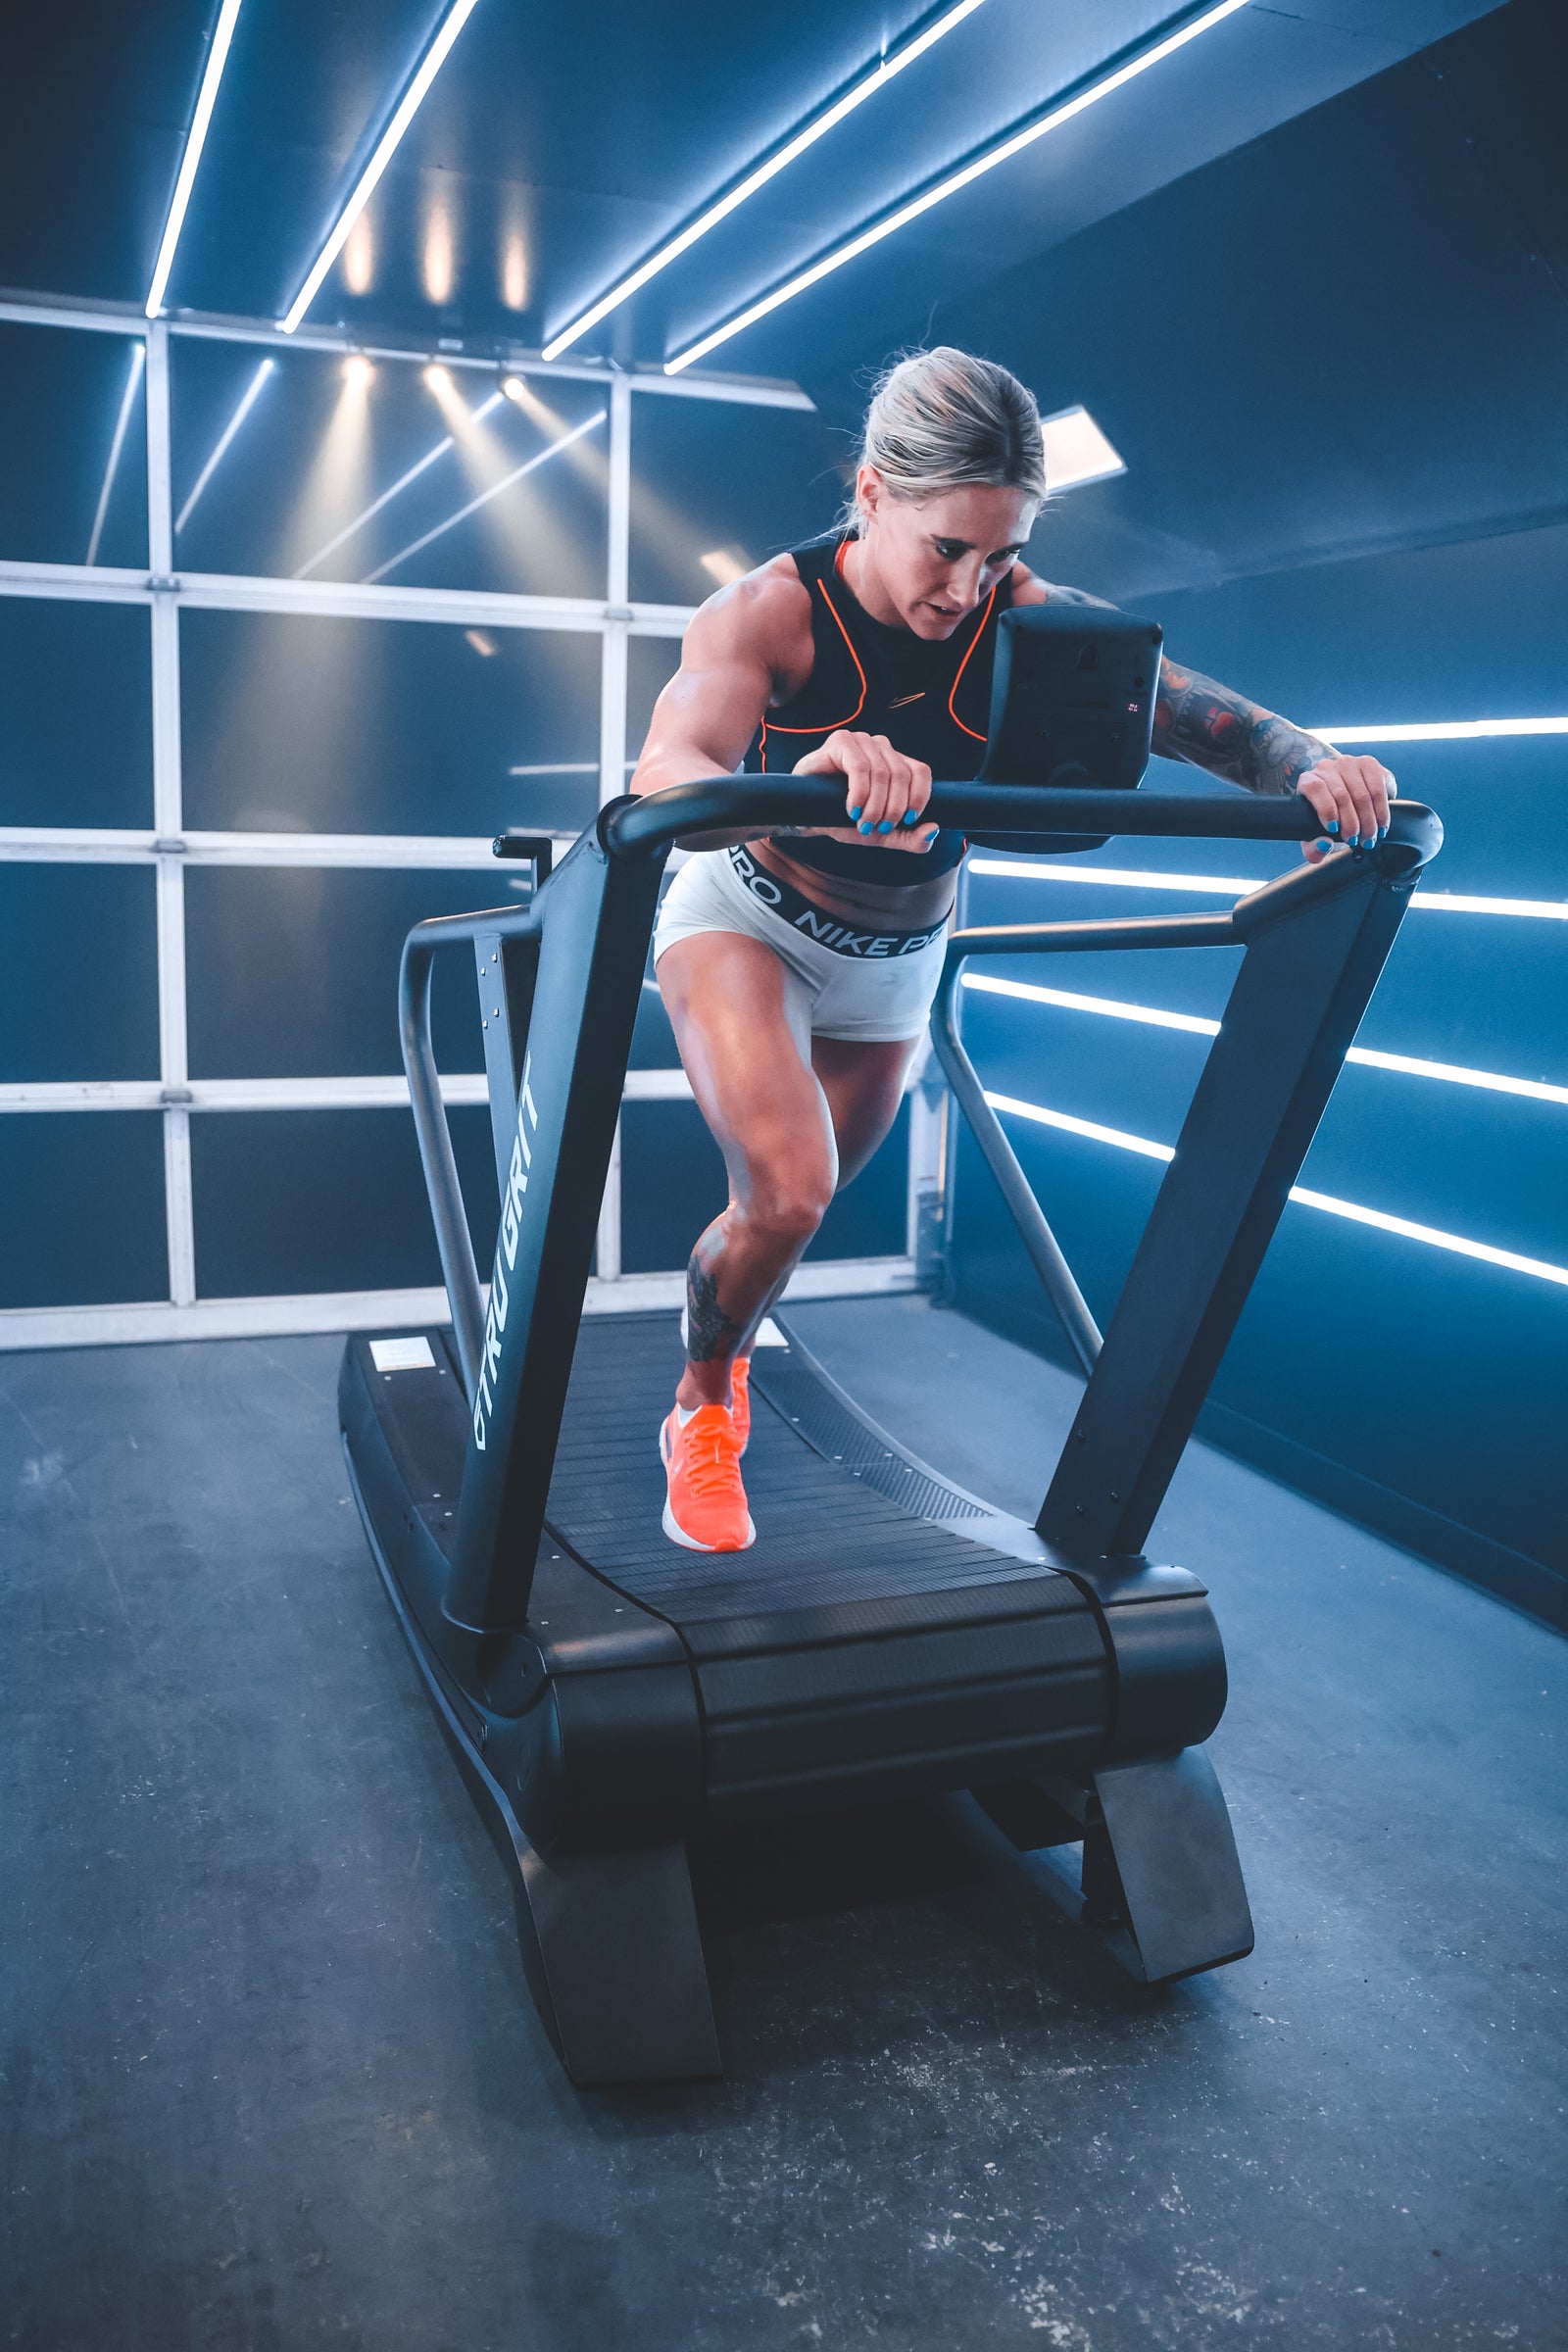 Manual Treadmill vs Electric: Which Should I Use?